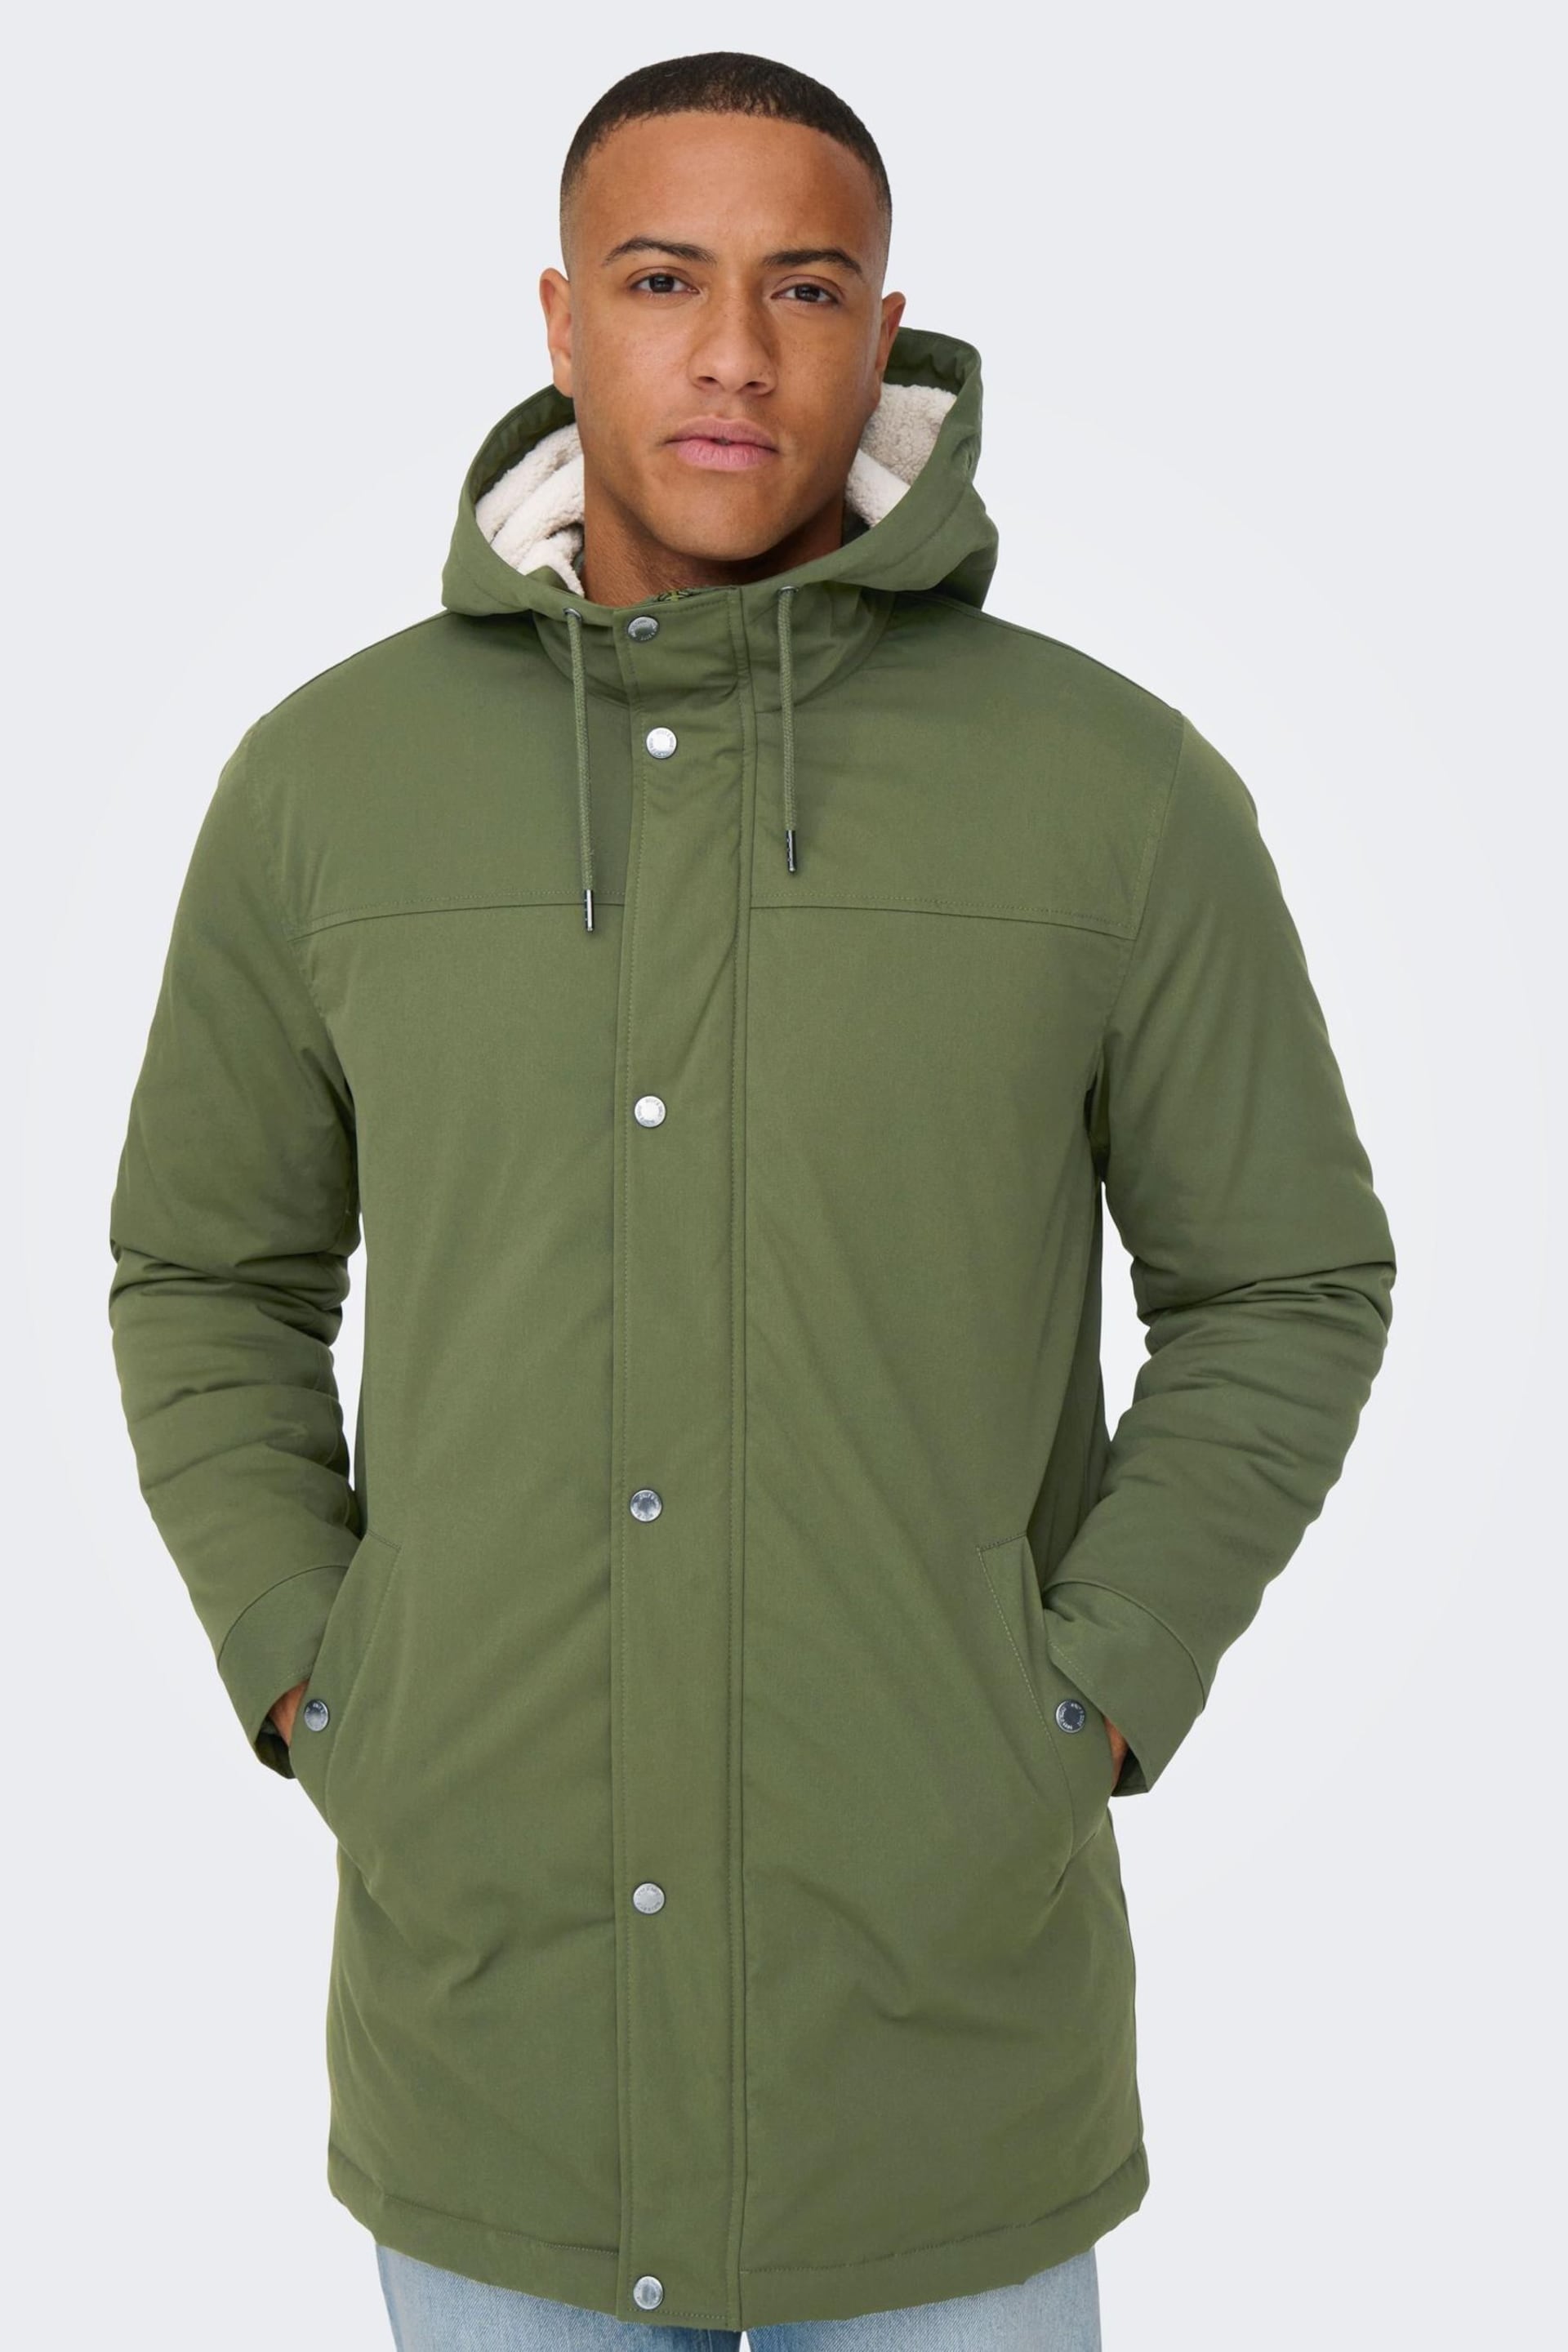 Only & Sons Green Parka Coat - Image 4 of 7